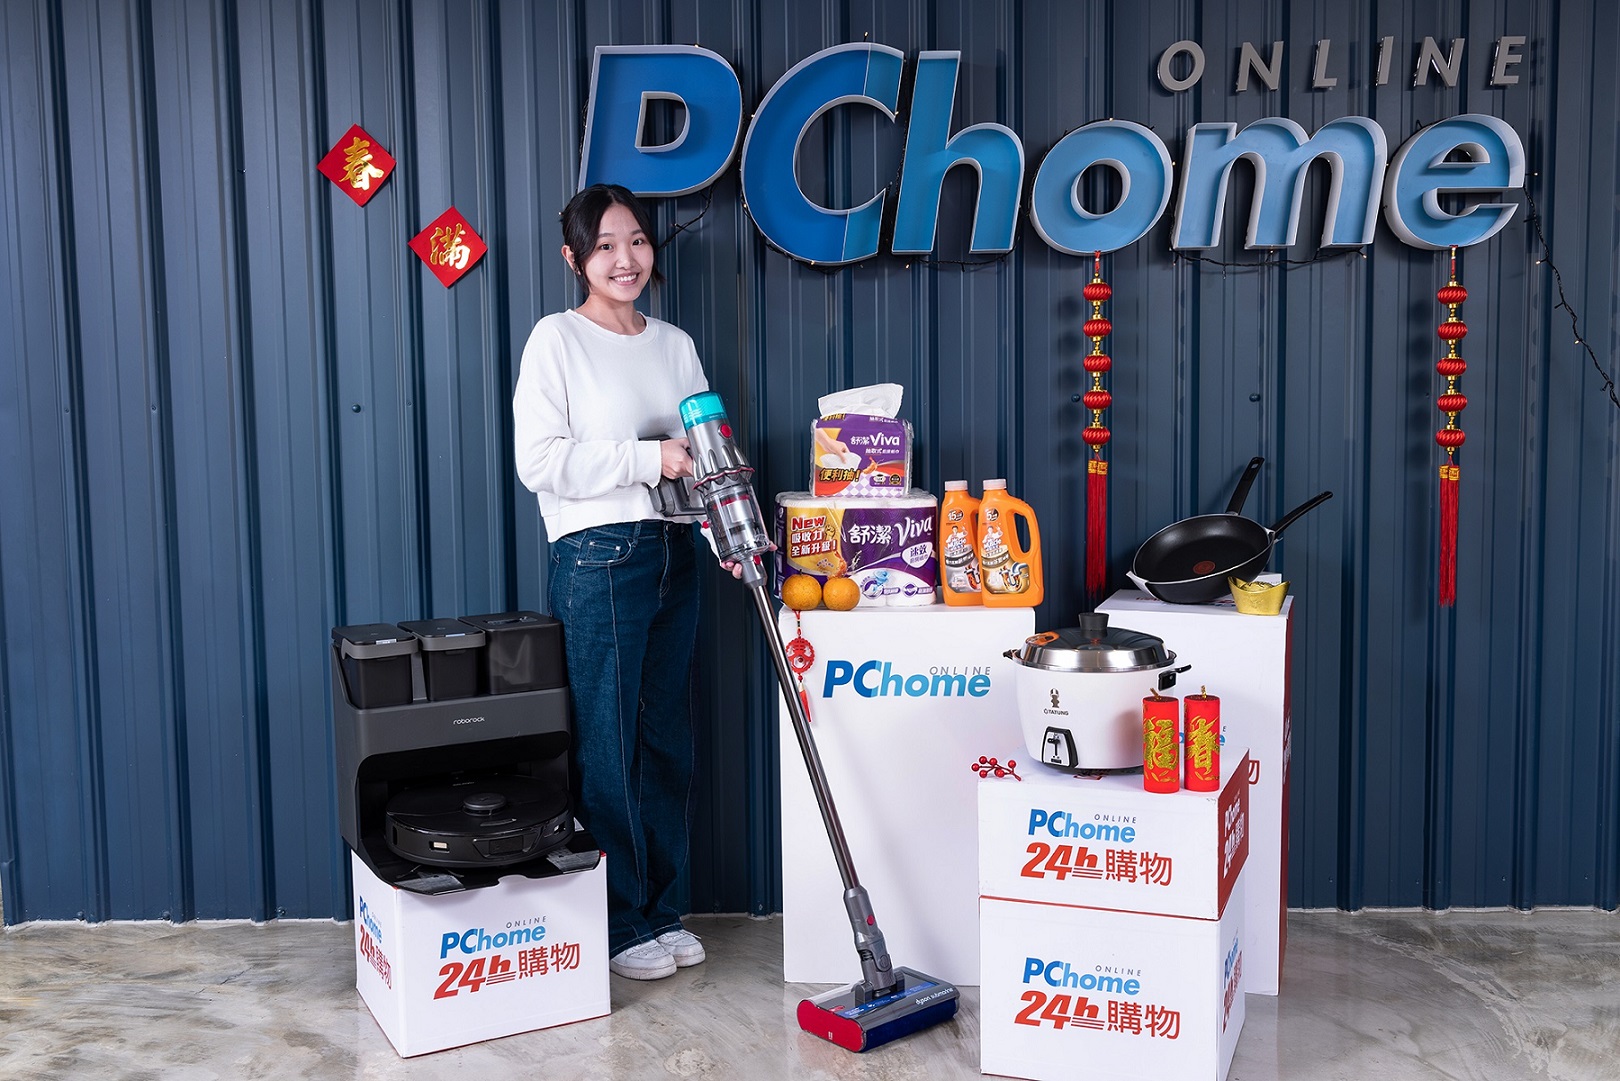 It's Time to Ring Out the Old and Ring in the New! Enjoy Discounts of Up to 69% on Robot Vacuums at PChome 24h Shopping; Sales of Home Appliances, Household Goods, Furniture, and Storage Supplies Grow by Double Digits